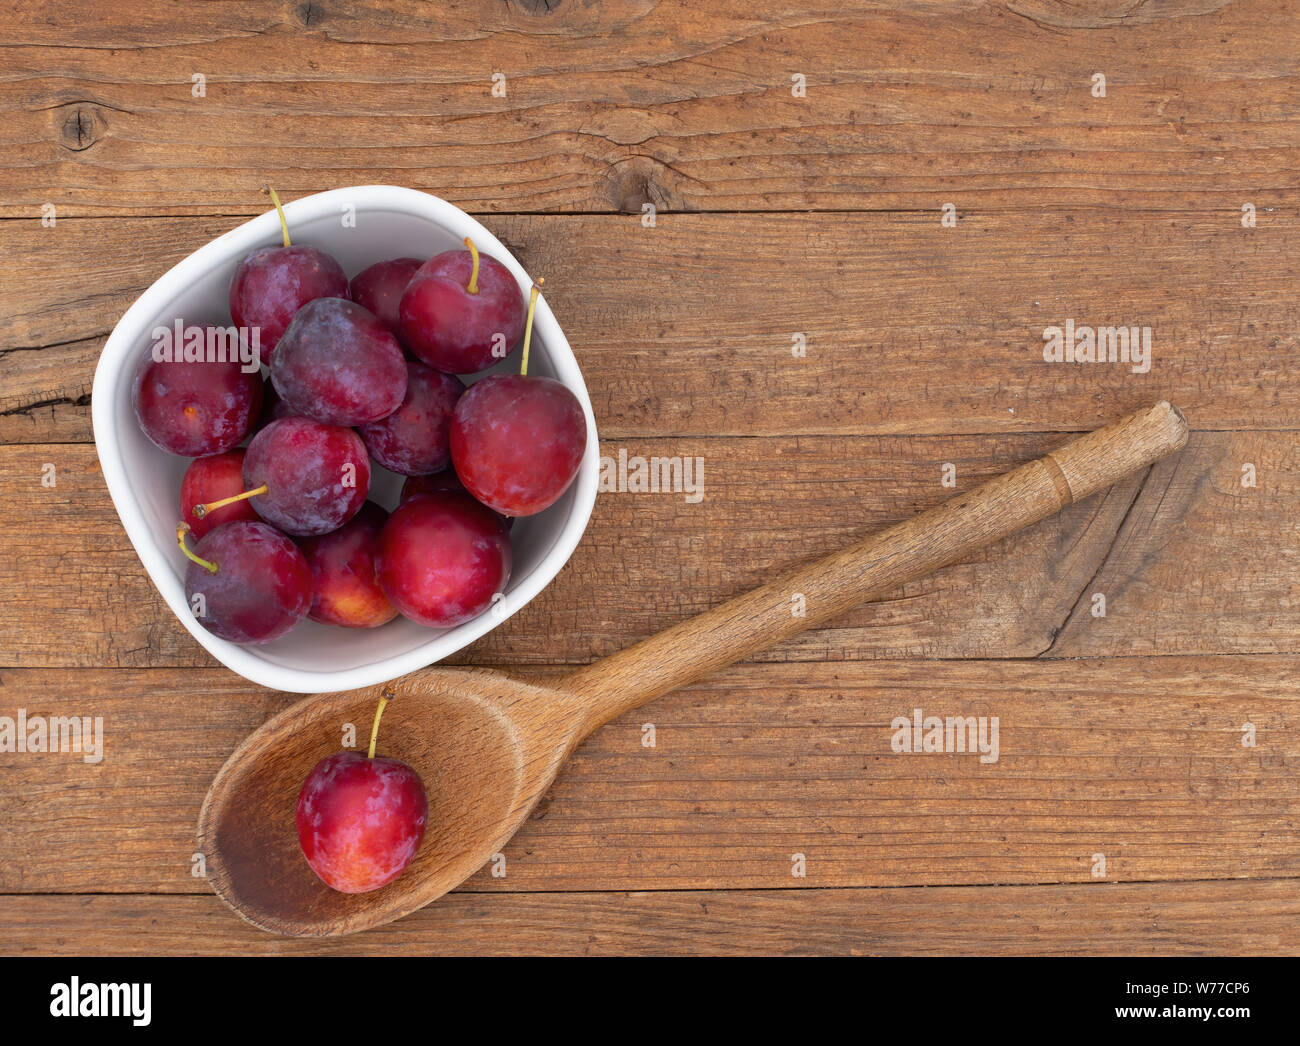 Red cherry plums in bowl, with wooden spoon, on wooden background. Stock Photo